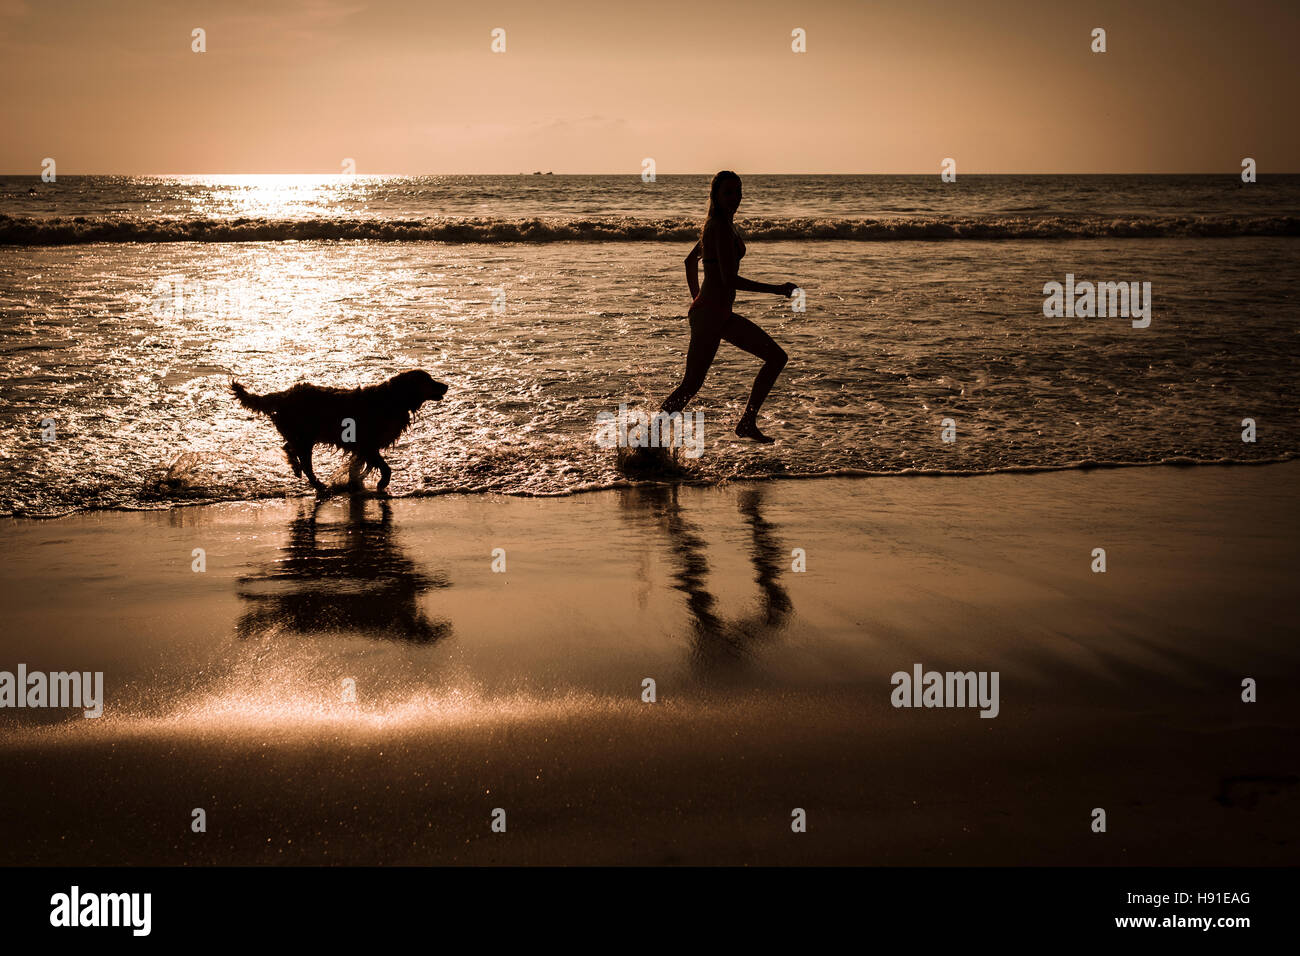 Silhouette of young woman running with dog at beach right before sunset. Riviera Nayarit, Mexico. Stock Photo